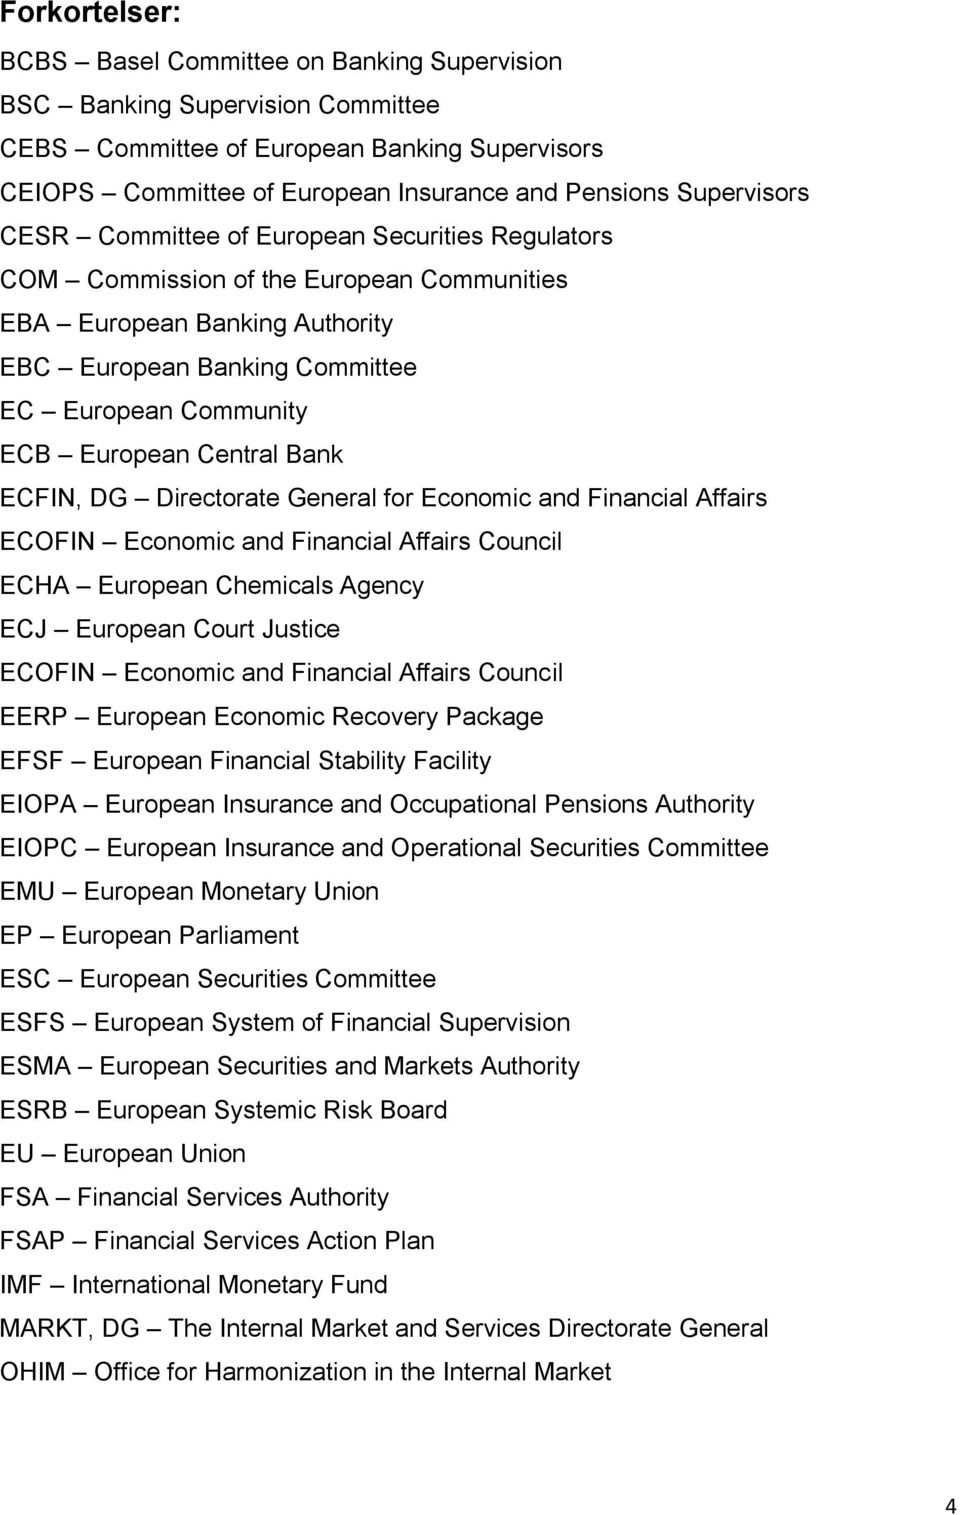 European Central Bank ECFIN, DG Directorate General for Economic and Financial Affairs ECOFIN Economic and Financial Affairs Council ECHA European Chemicals Agency ECJ European Court Justice ECOFIN